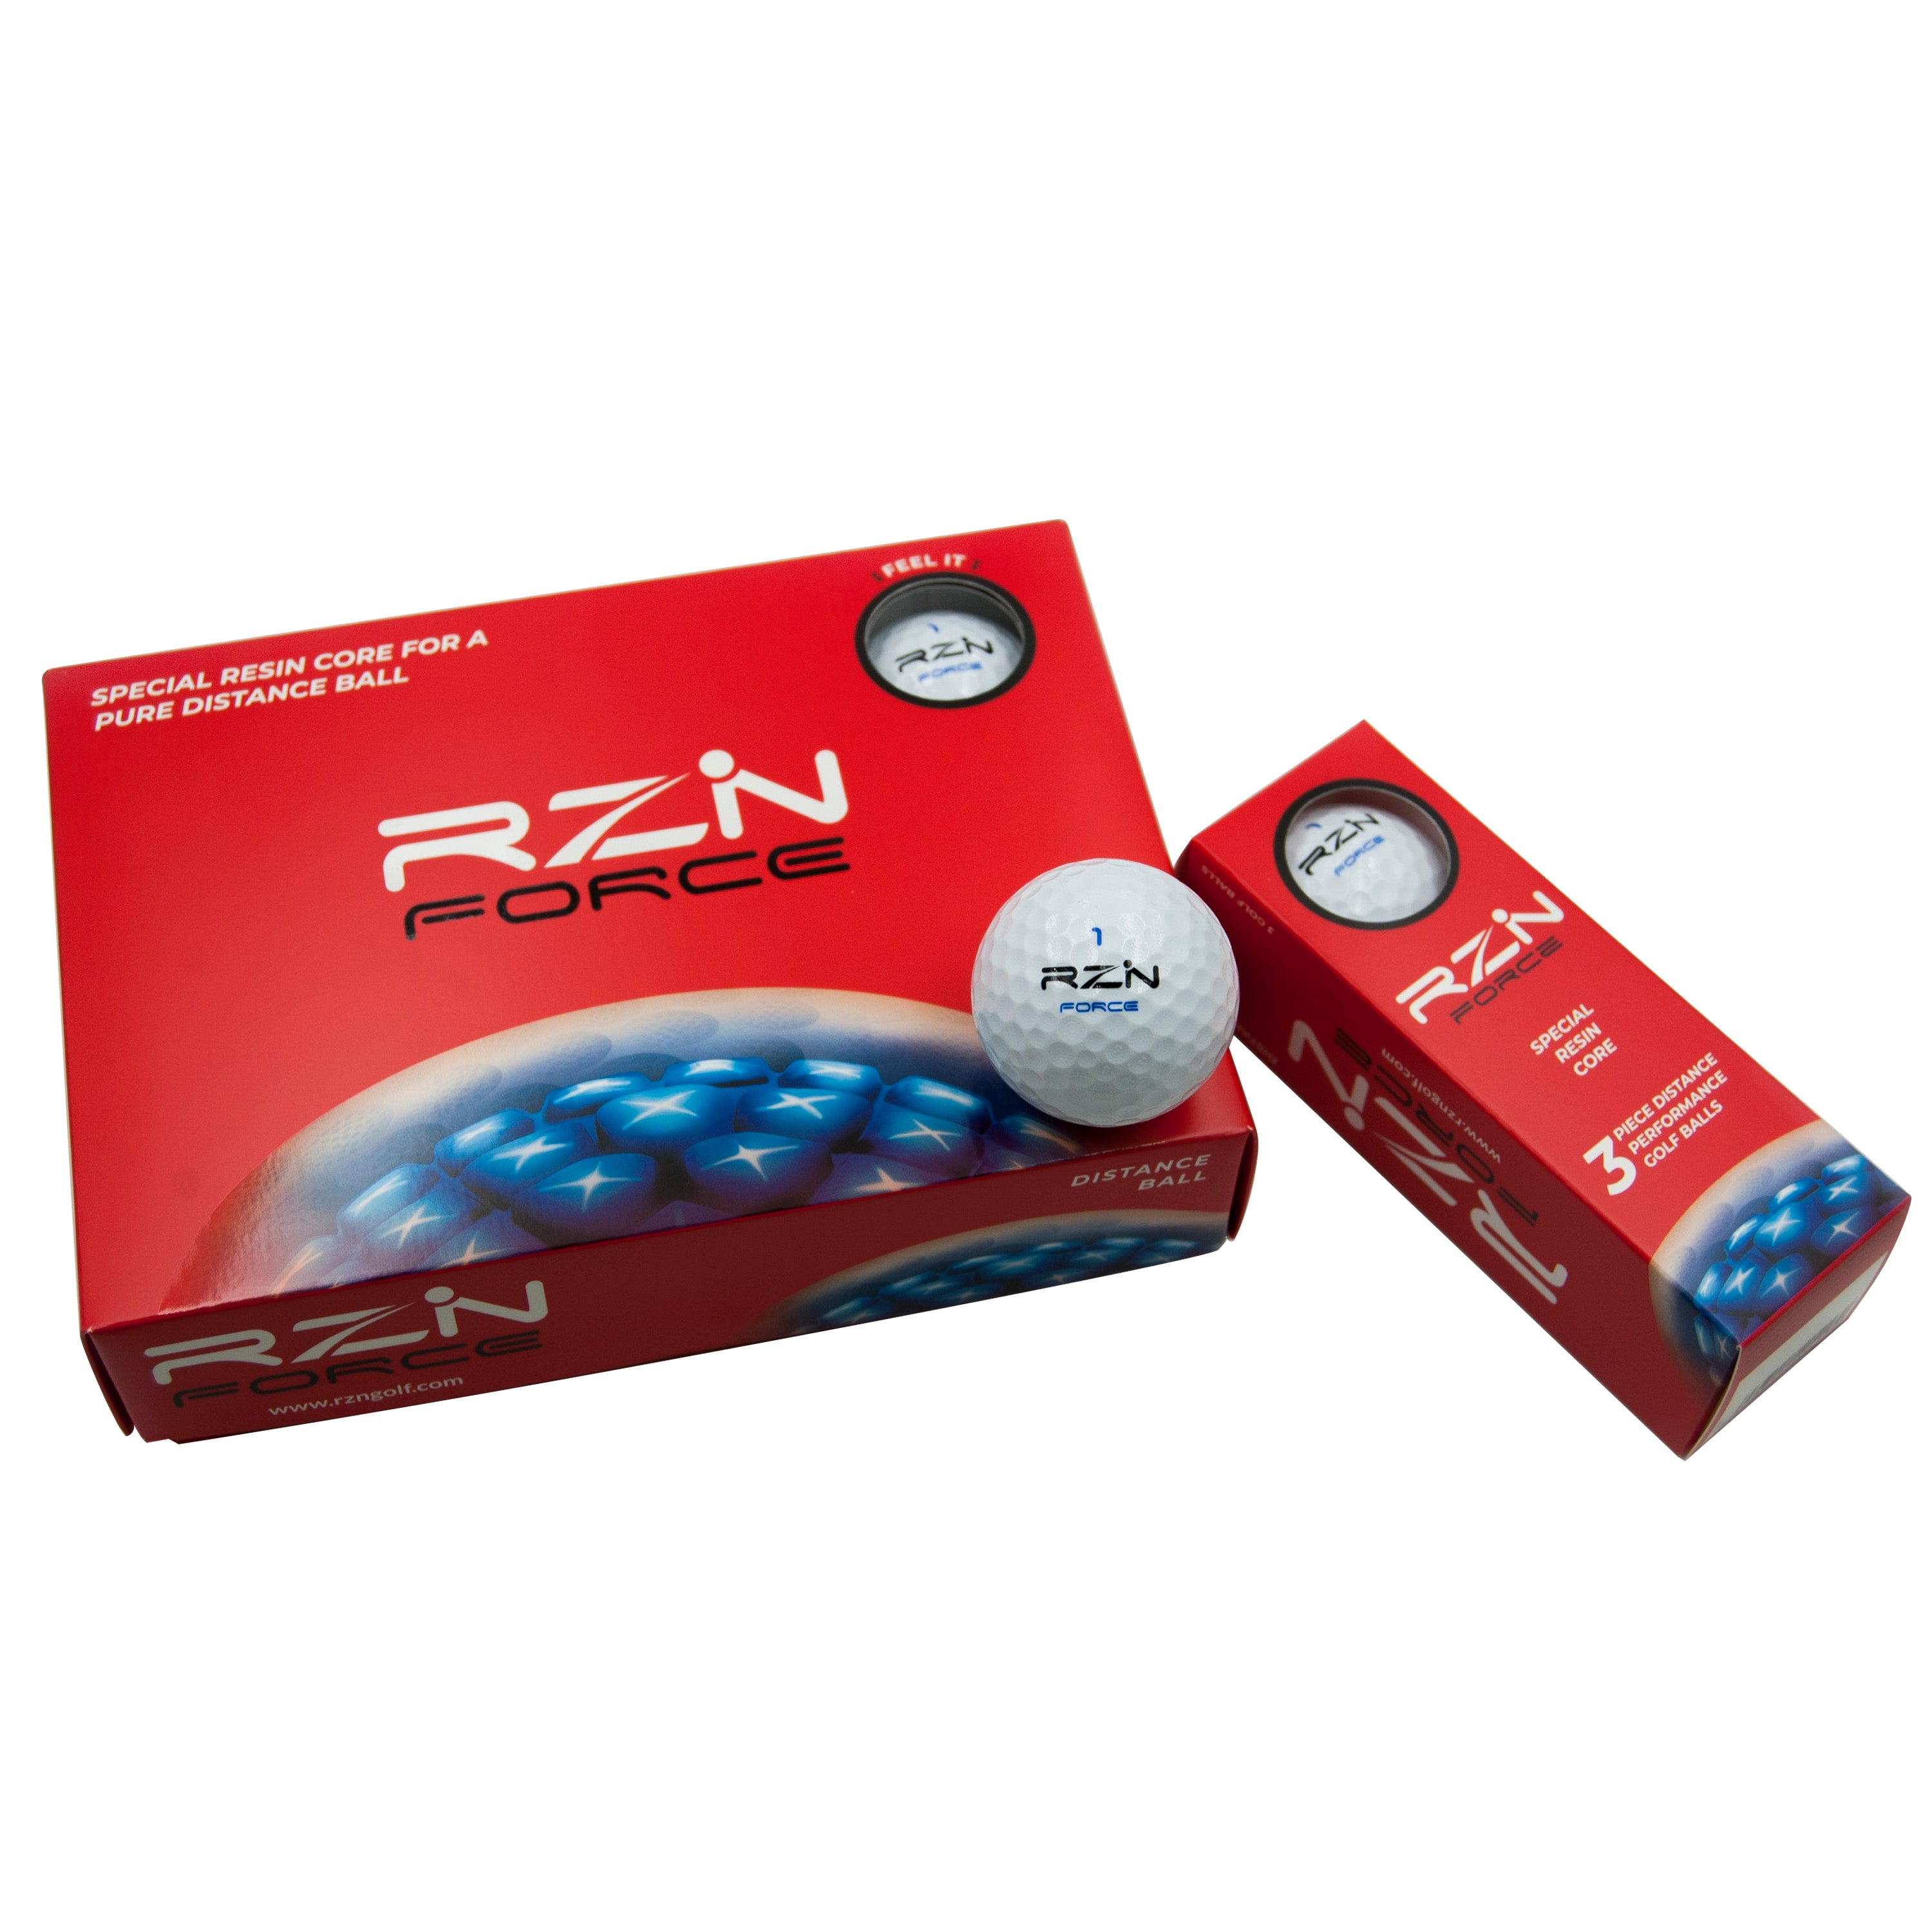 RZN FORCE, 12 Pack